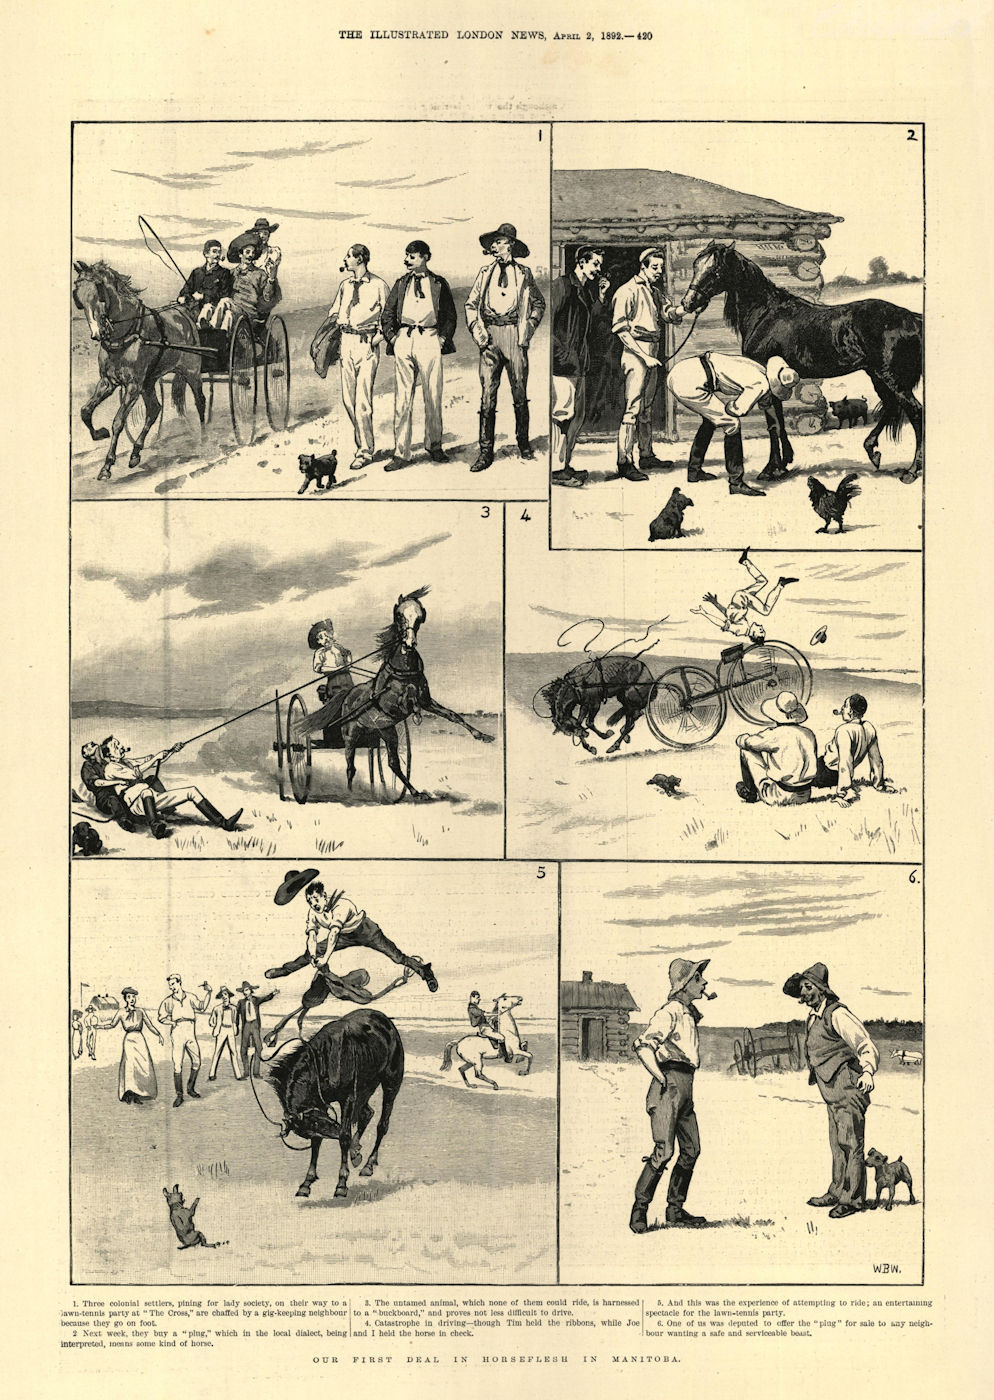 Our first deal in horseflesh in Manitoba. Canada. Cartoons 1892 old print